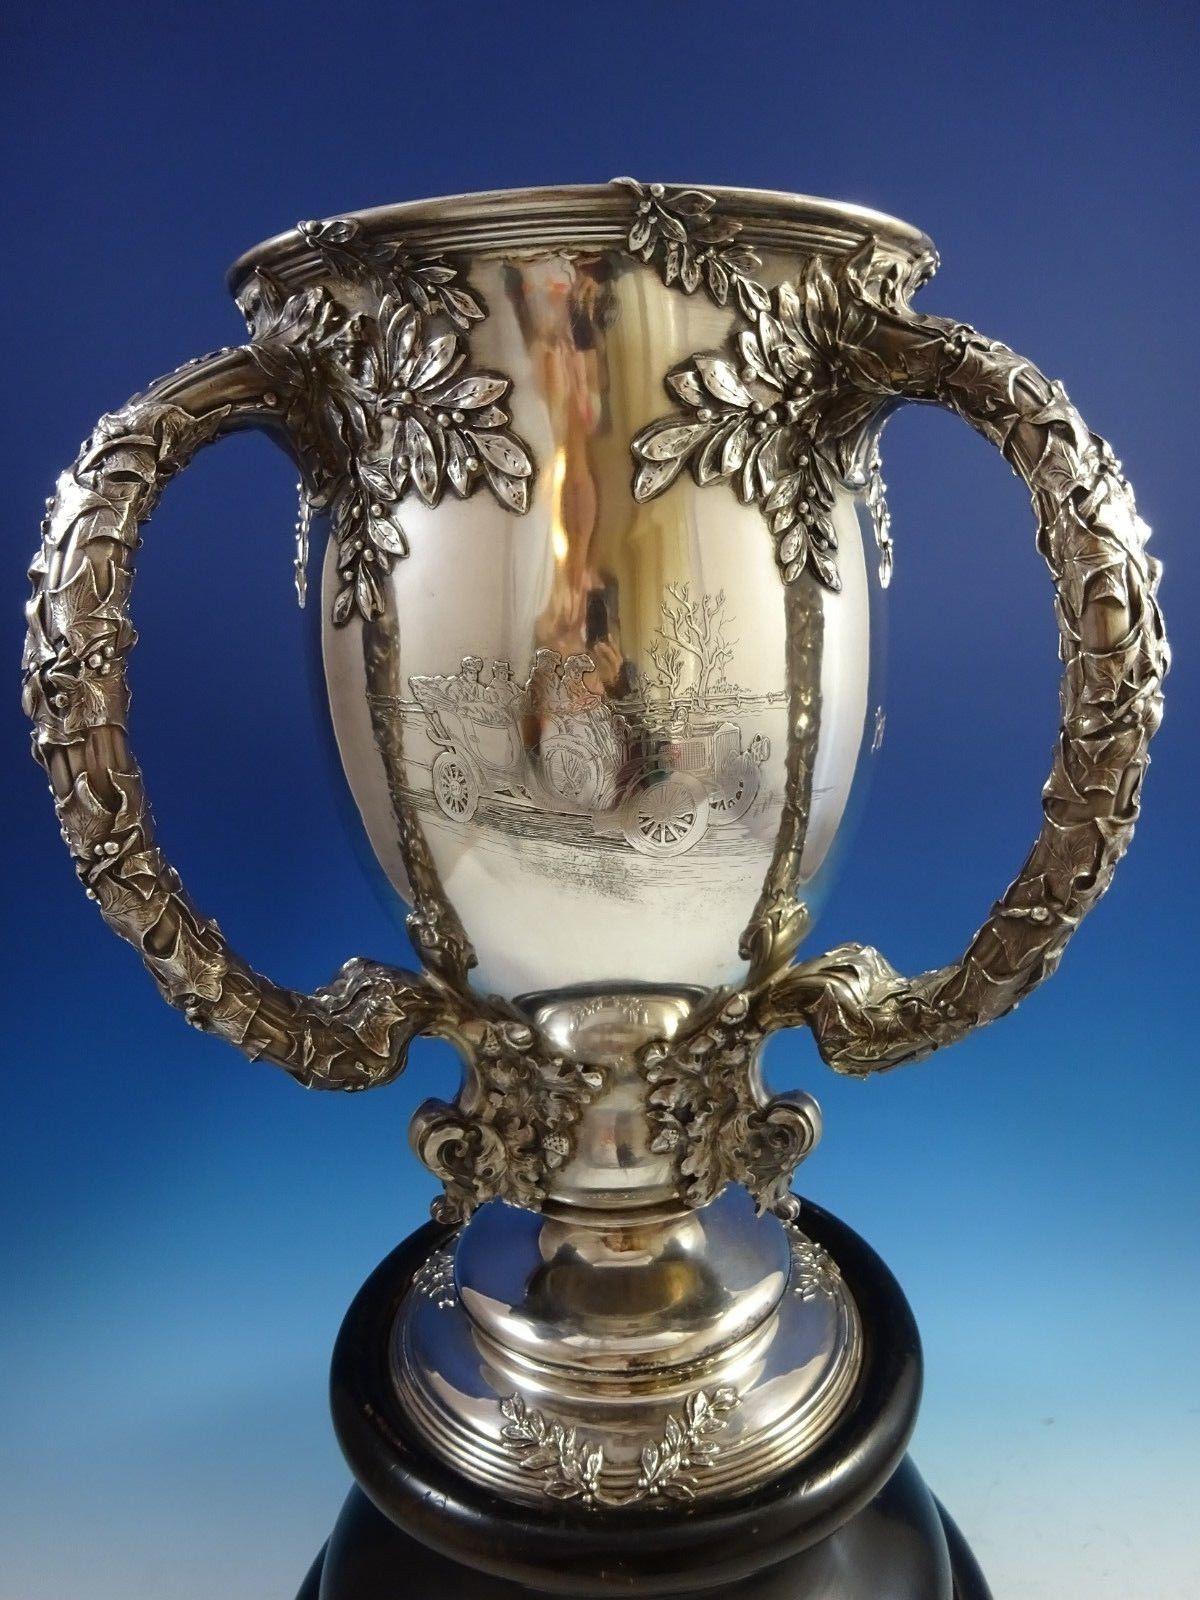 Magnificent 1907-1909 MacDonald & Campbell Perpetual Endurance Auto Trophy of the Quaker City Motor Club

This superb monumental sterling silver trophy retailed by J.E. Caldwell in Philadelphia features three handles with applied ivy and berries.